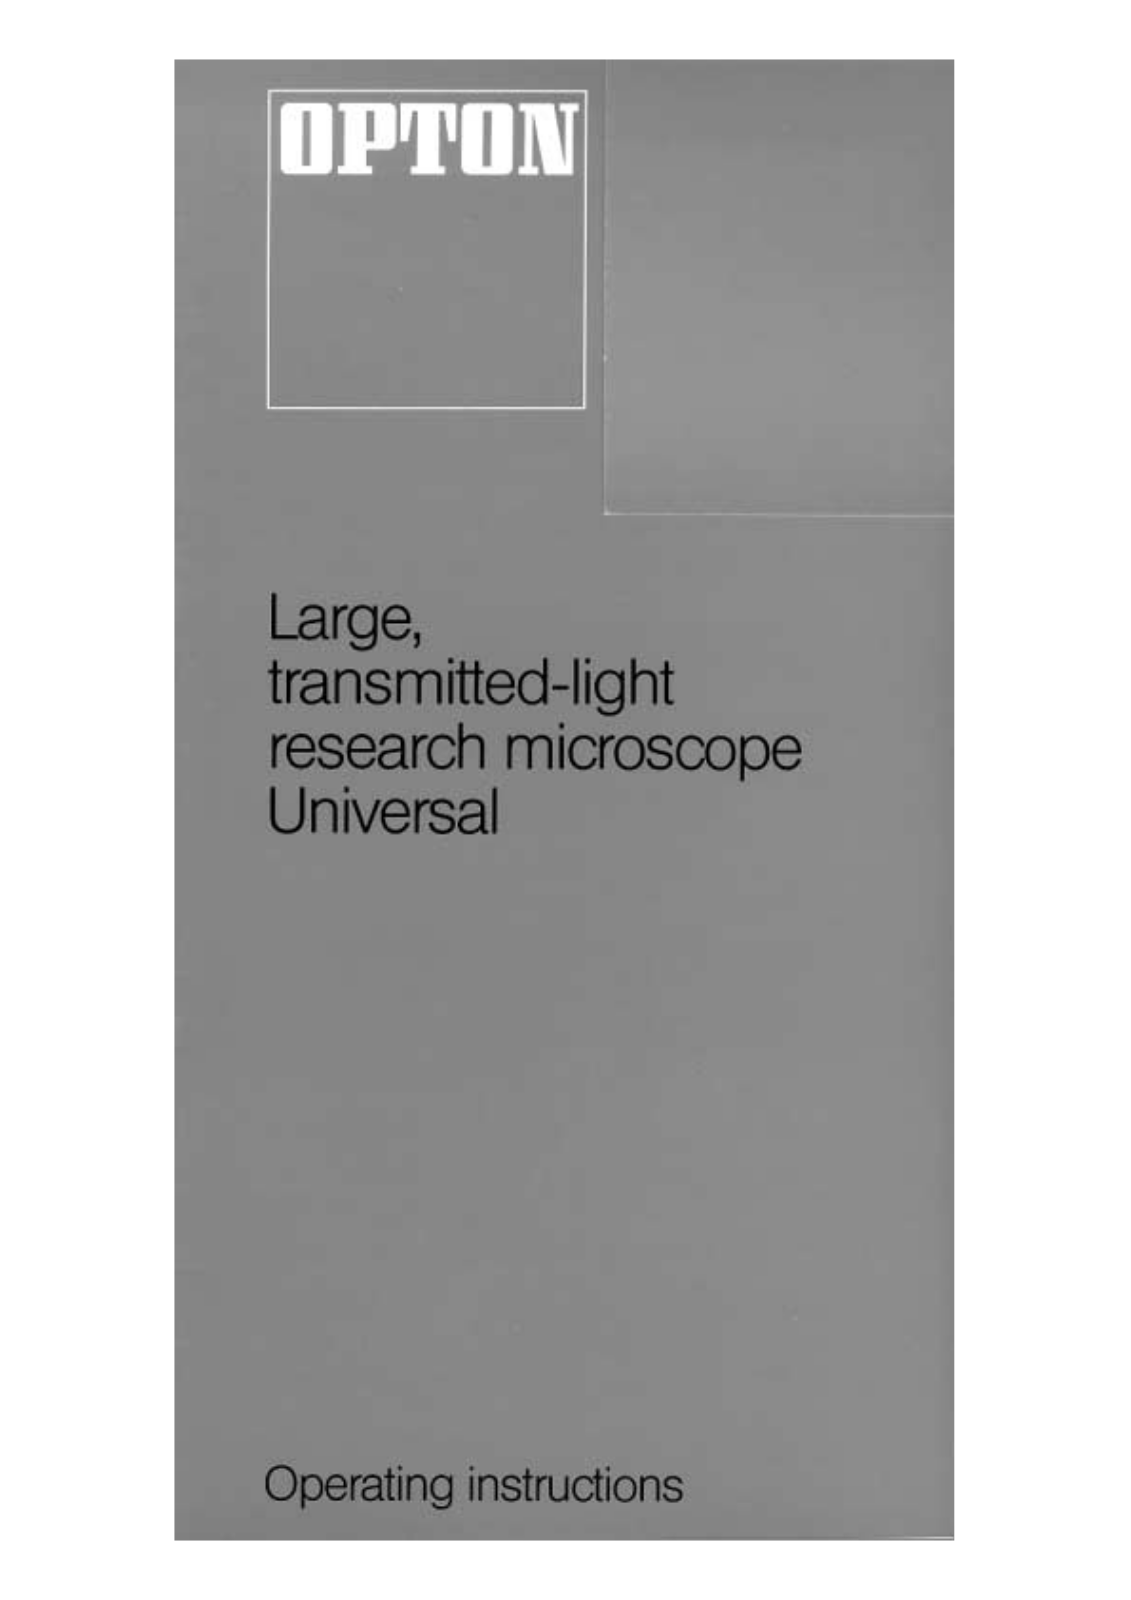 Zeiss UNIVERSAL MICROSCOPE Operating Manual